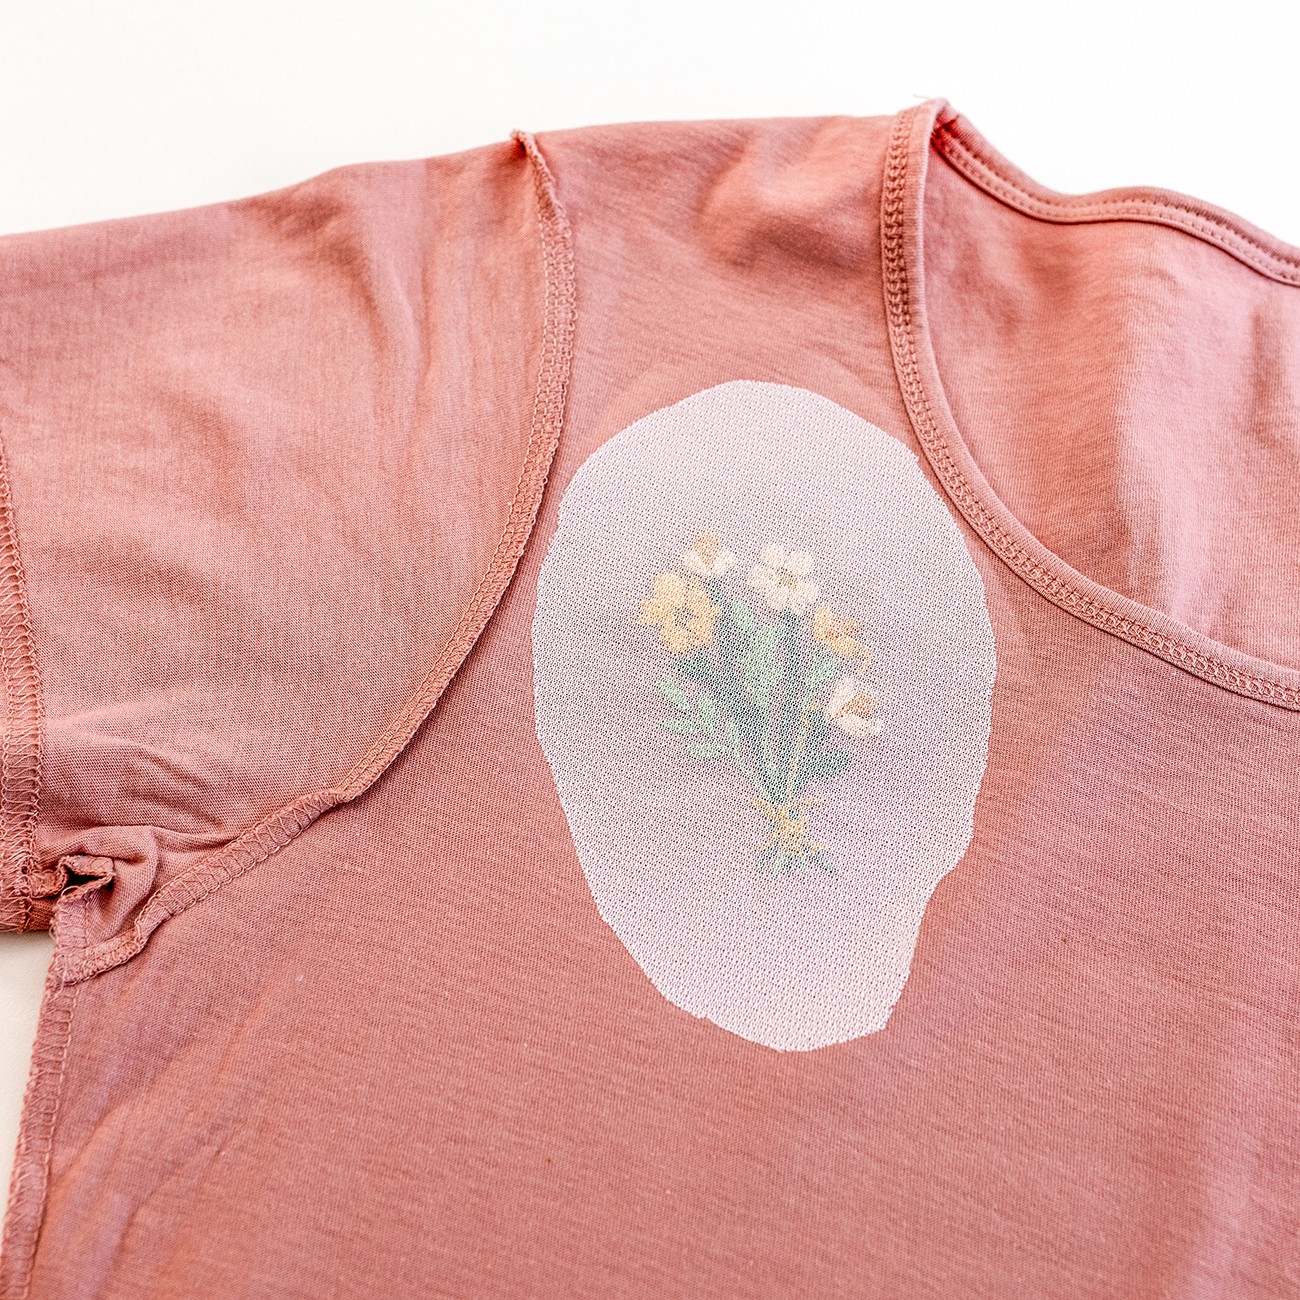 A Beginner's Guide for Embroidery onto Clothing – Clever Poppy